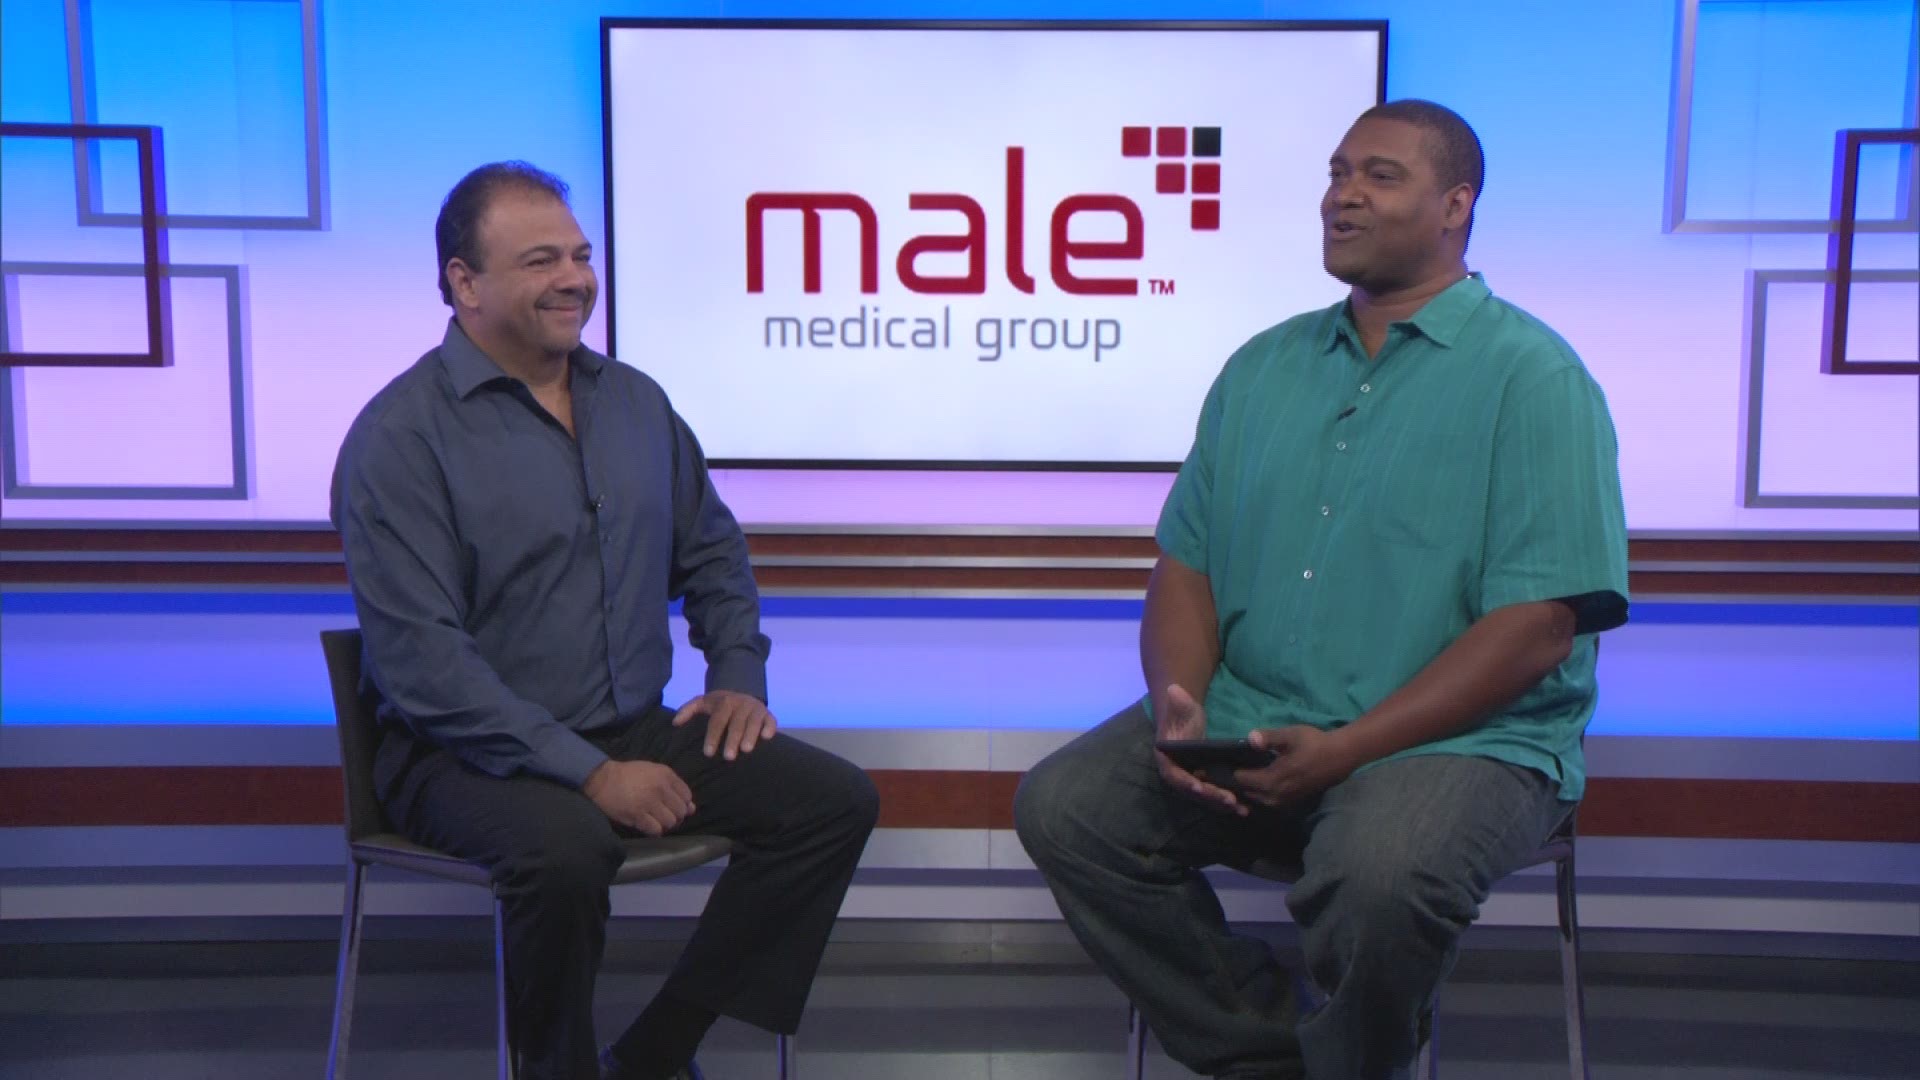 MALE MEDICAL GROUP